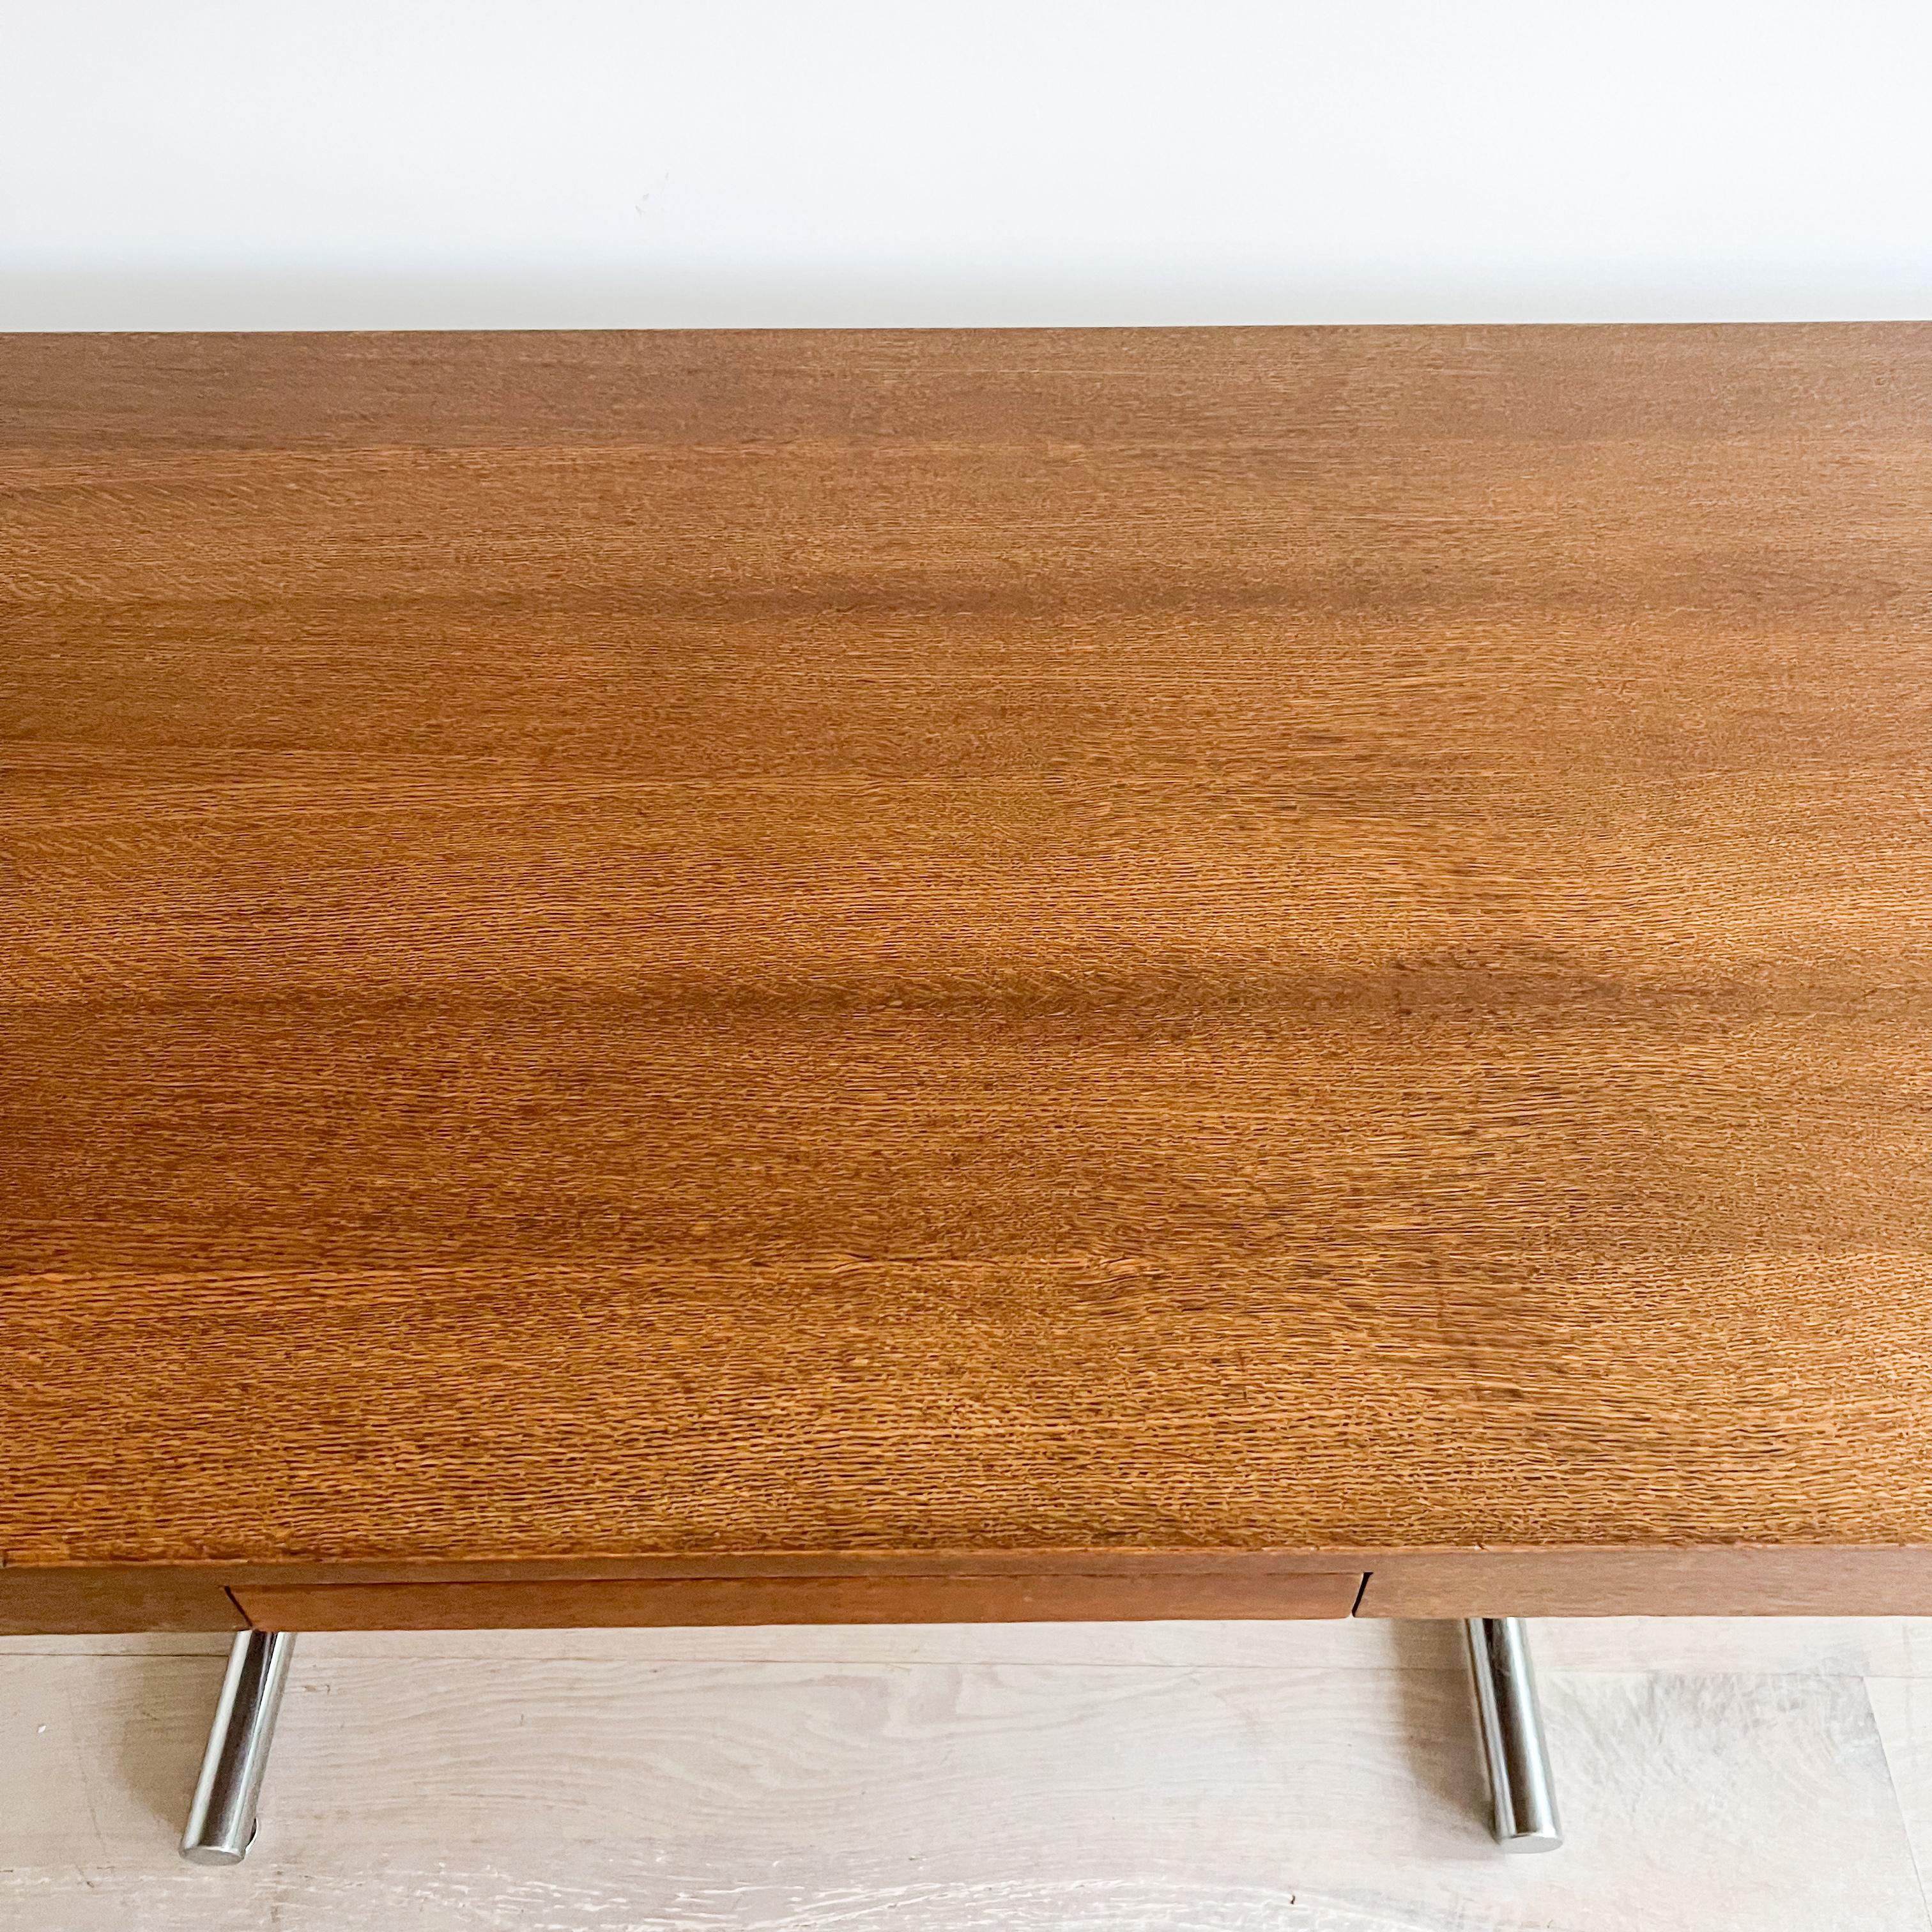 Late 20th Century Mid Century Oak Desk with Chrome Base by Hans Eichenberger for Stendig